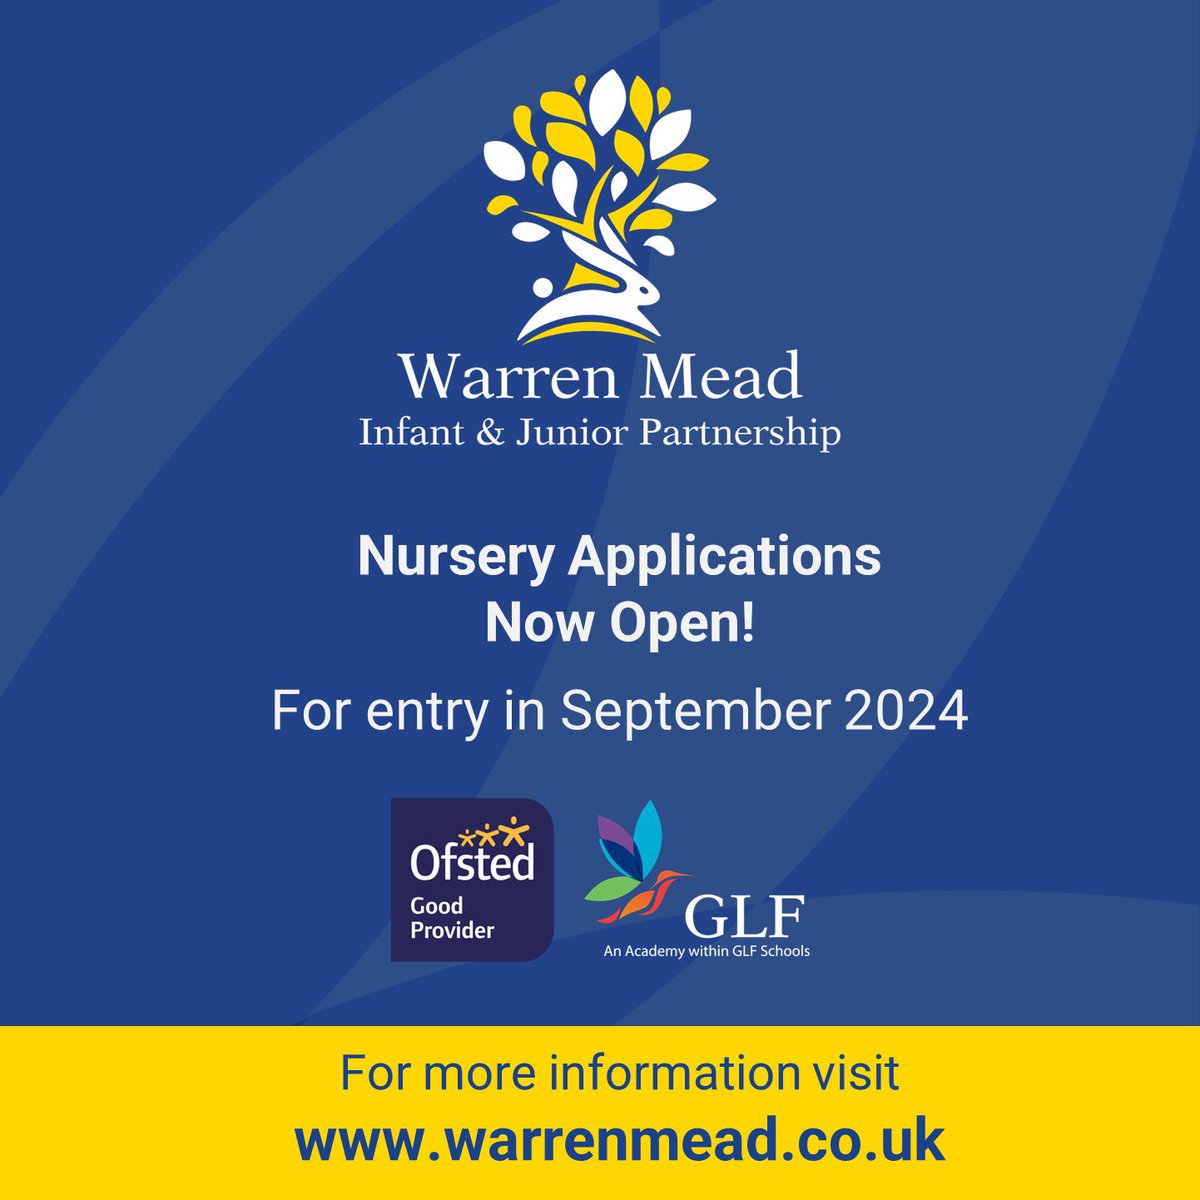 Application to our wonderful Warren Mead Nursery are now open! Our nursery is a key part of our school. We provide a safe and secure setting for children, allowing them to develop a love of learning! If you would like a tour of the nursery and school, please contact us📞